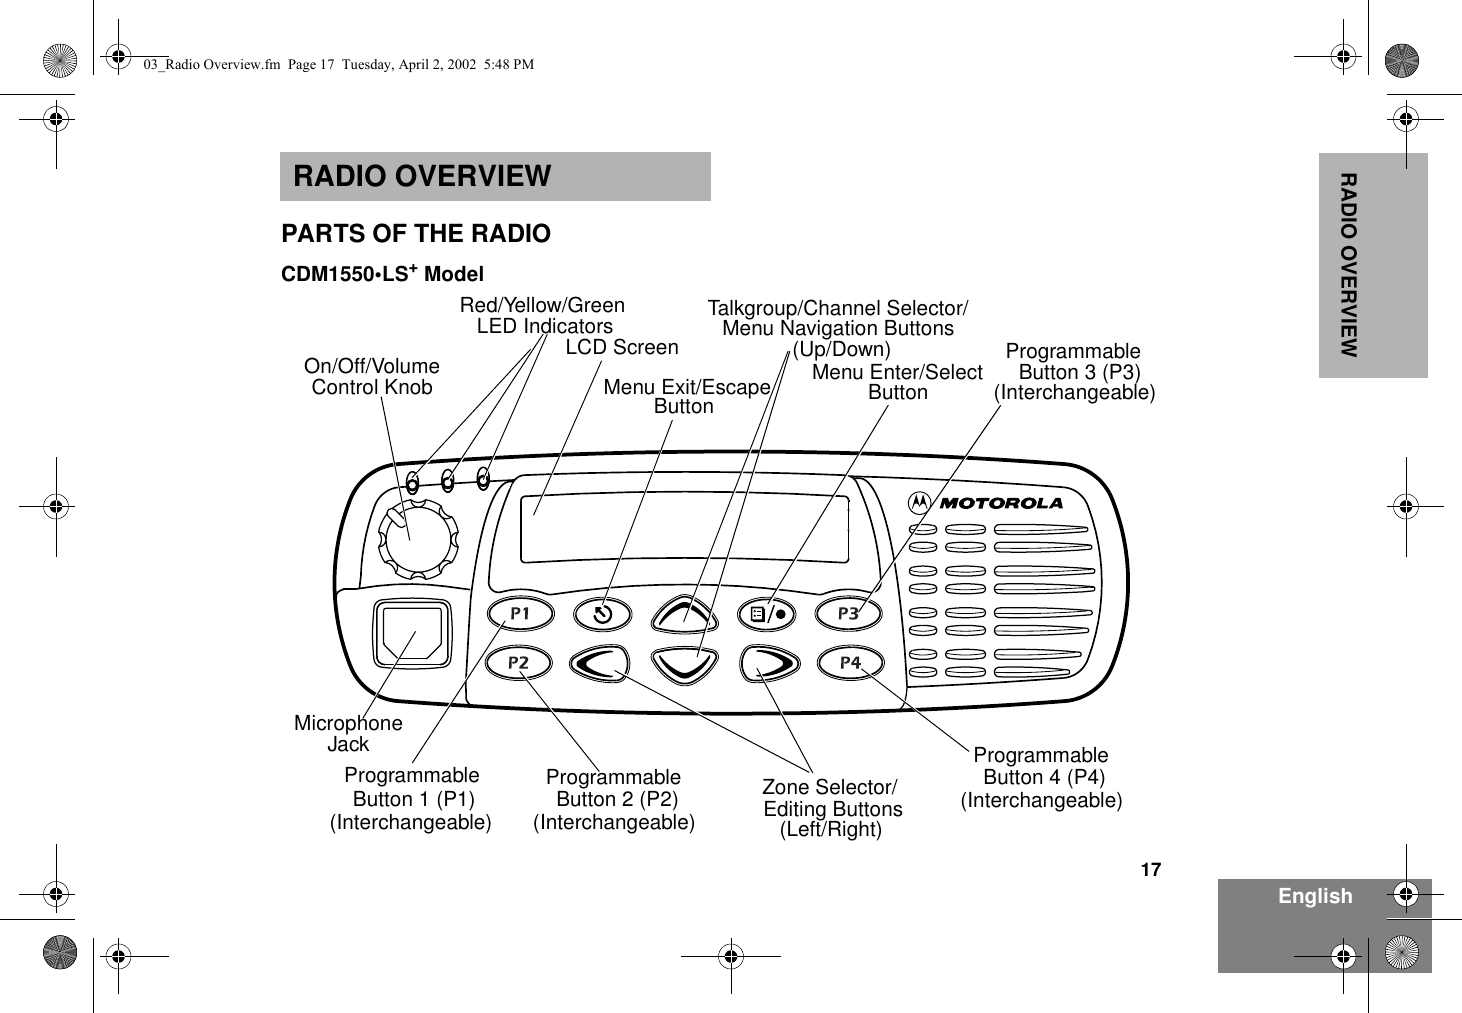 17EnglishRADIO OVERVIEWRADIO OVERVIEWPARTS OF THE RADIOCDM1550•LS+ ModelZone Selector/Editing ButtonsMenu Enter/SelectButton(Interchangeable)ProgrammableButton 2 (P2) (Interchangeable)ProgrammableButton 4 (P4)(Interchangeable)ProgrammableButton 3 (P3)LCD ScreenRed/Yellow/Green   LED Indicators Menu Exit/EscapeButton(Interchangeable)ProgrammableButton 1 (P1)(Left/Right)MicrophoneJackControl KnobOn/Off/VolumeTalkgroup/Channel Selector/Menu Navigation Buttons          (Up/Down)03_Radio Overview.fm  Page 17  Tuesday, April 2, 2002  5:48 PM